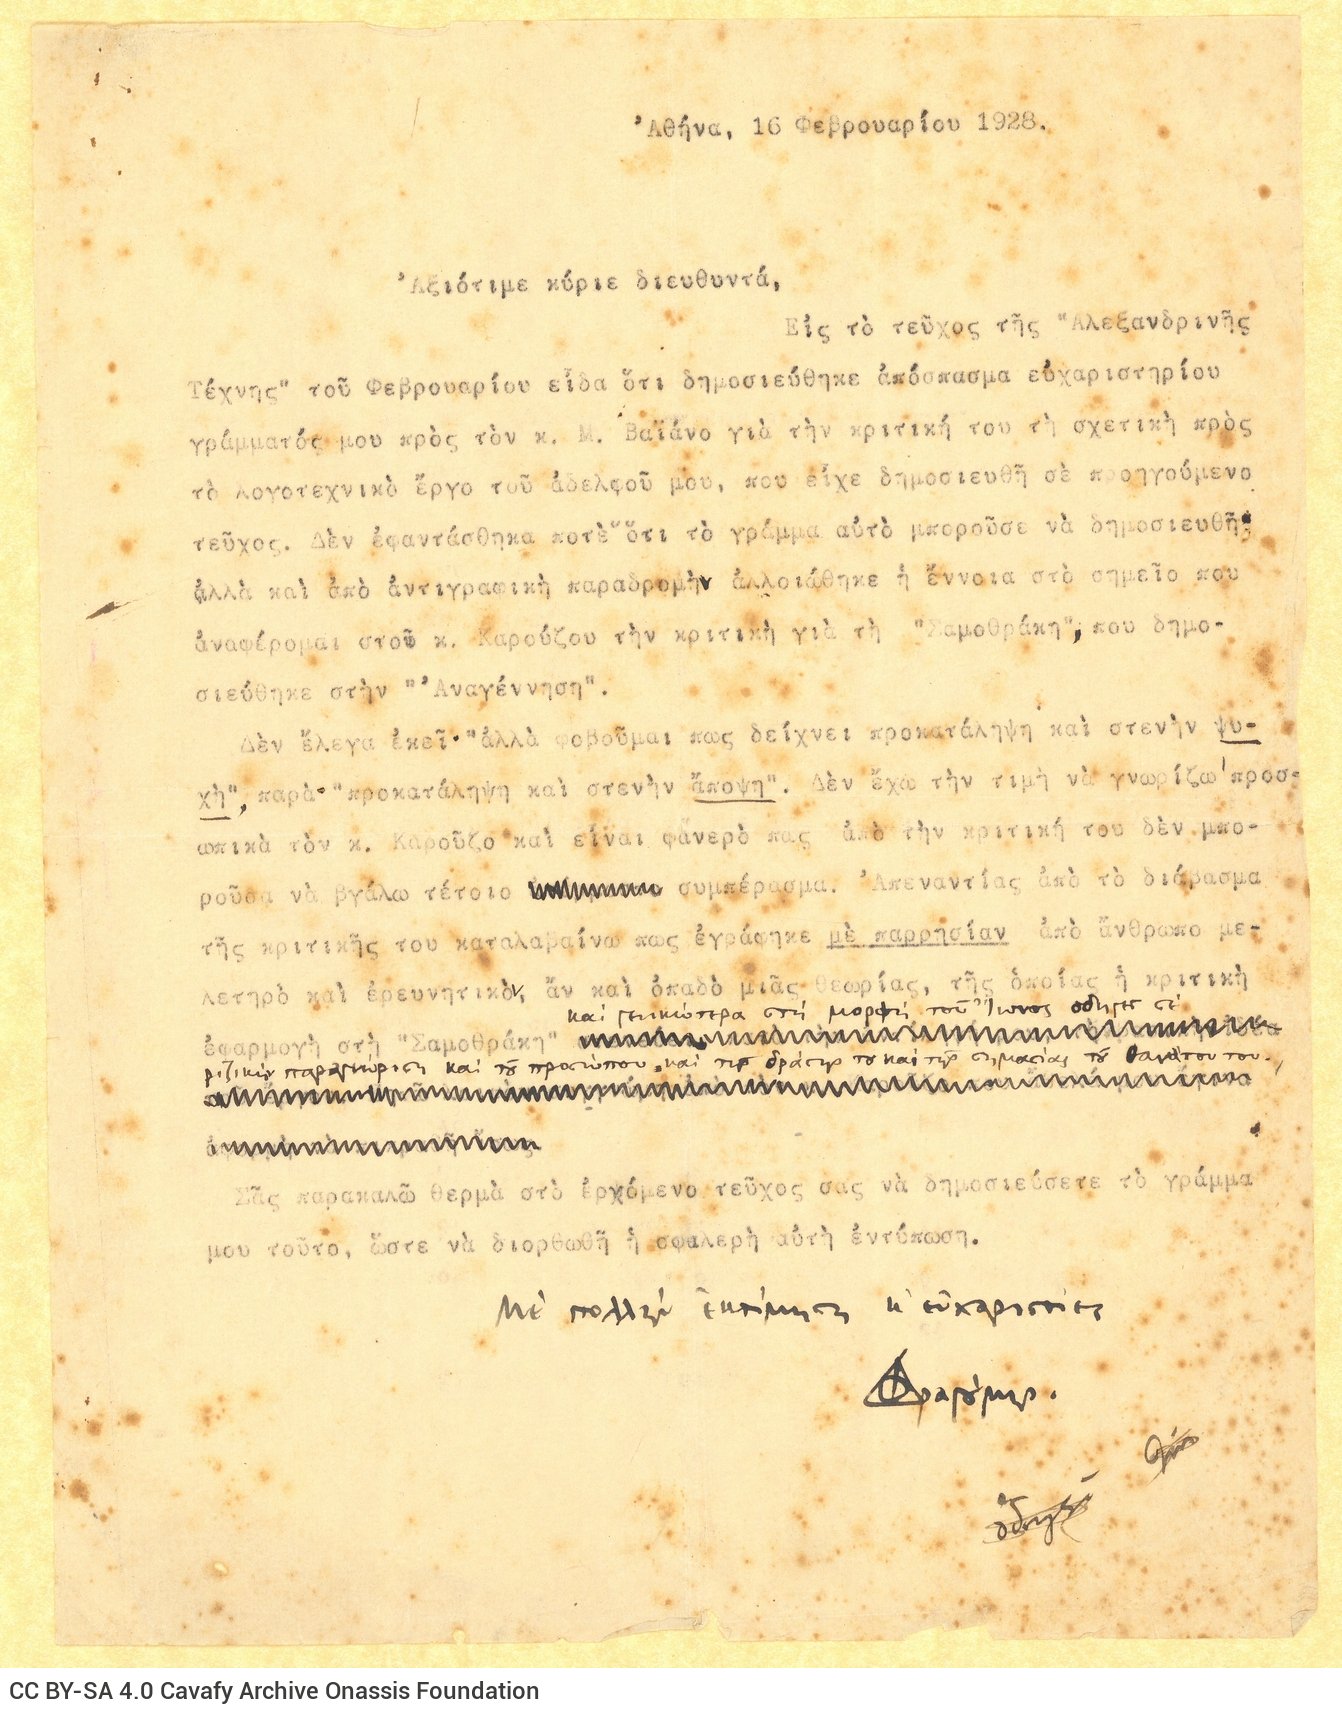 Typewritten letter by Filippos Dragoumis to the journal *Alexandrini Techni*. The author refers to a letter of his to Marios 